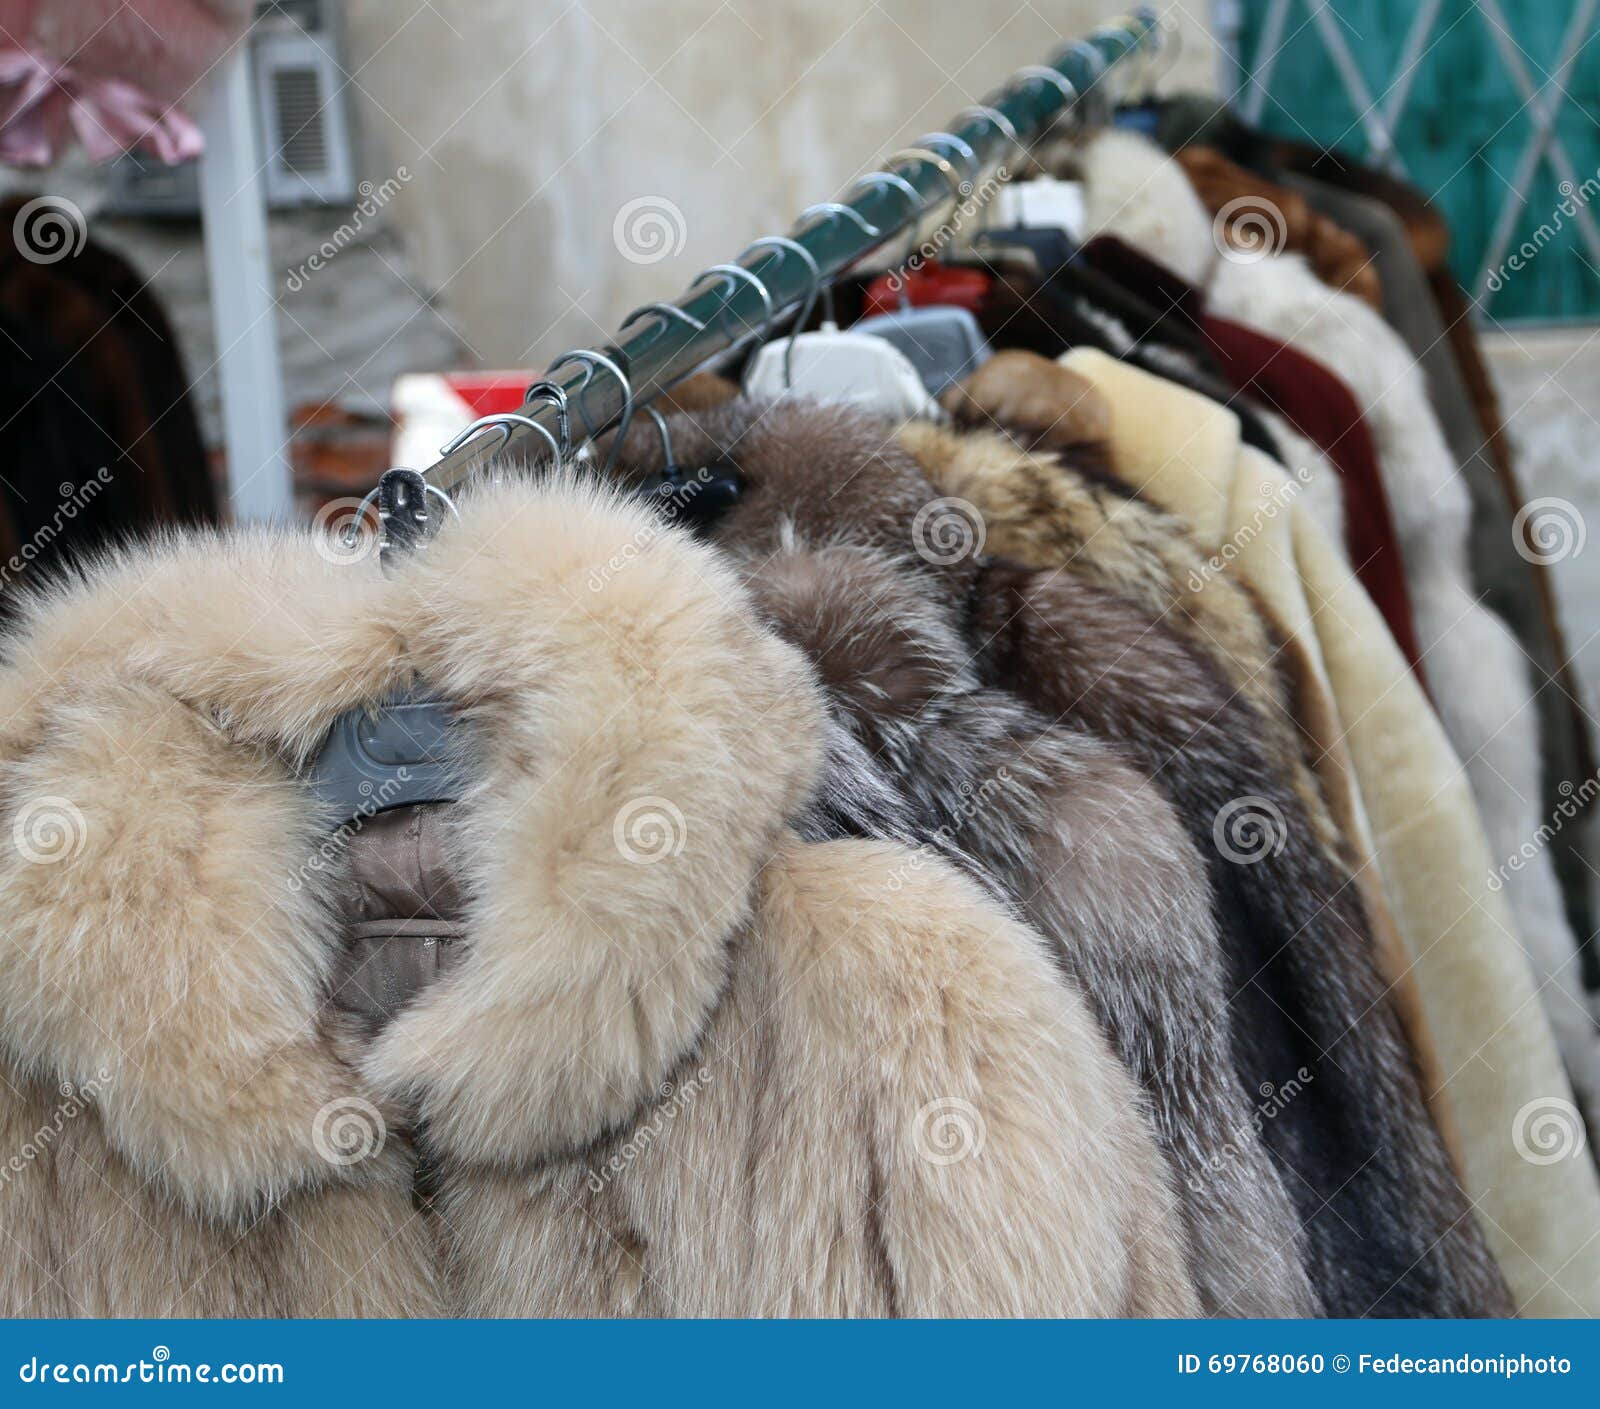 Valuable Fur Coat in Vintage Style for Sale in the Flea Market Stock ...